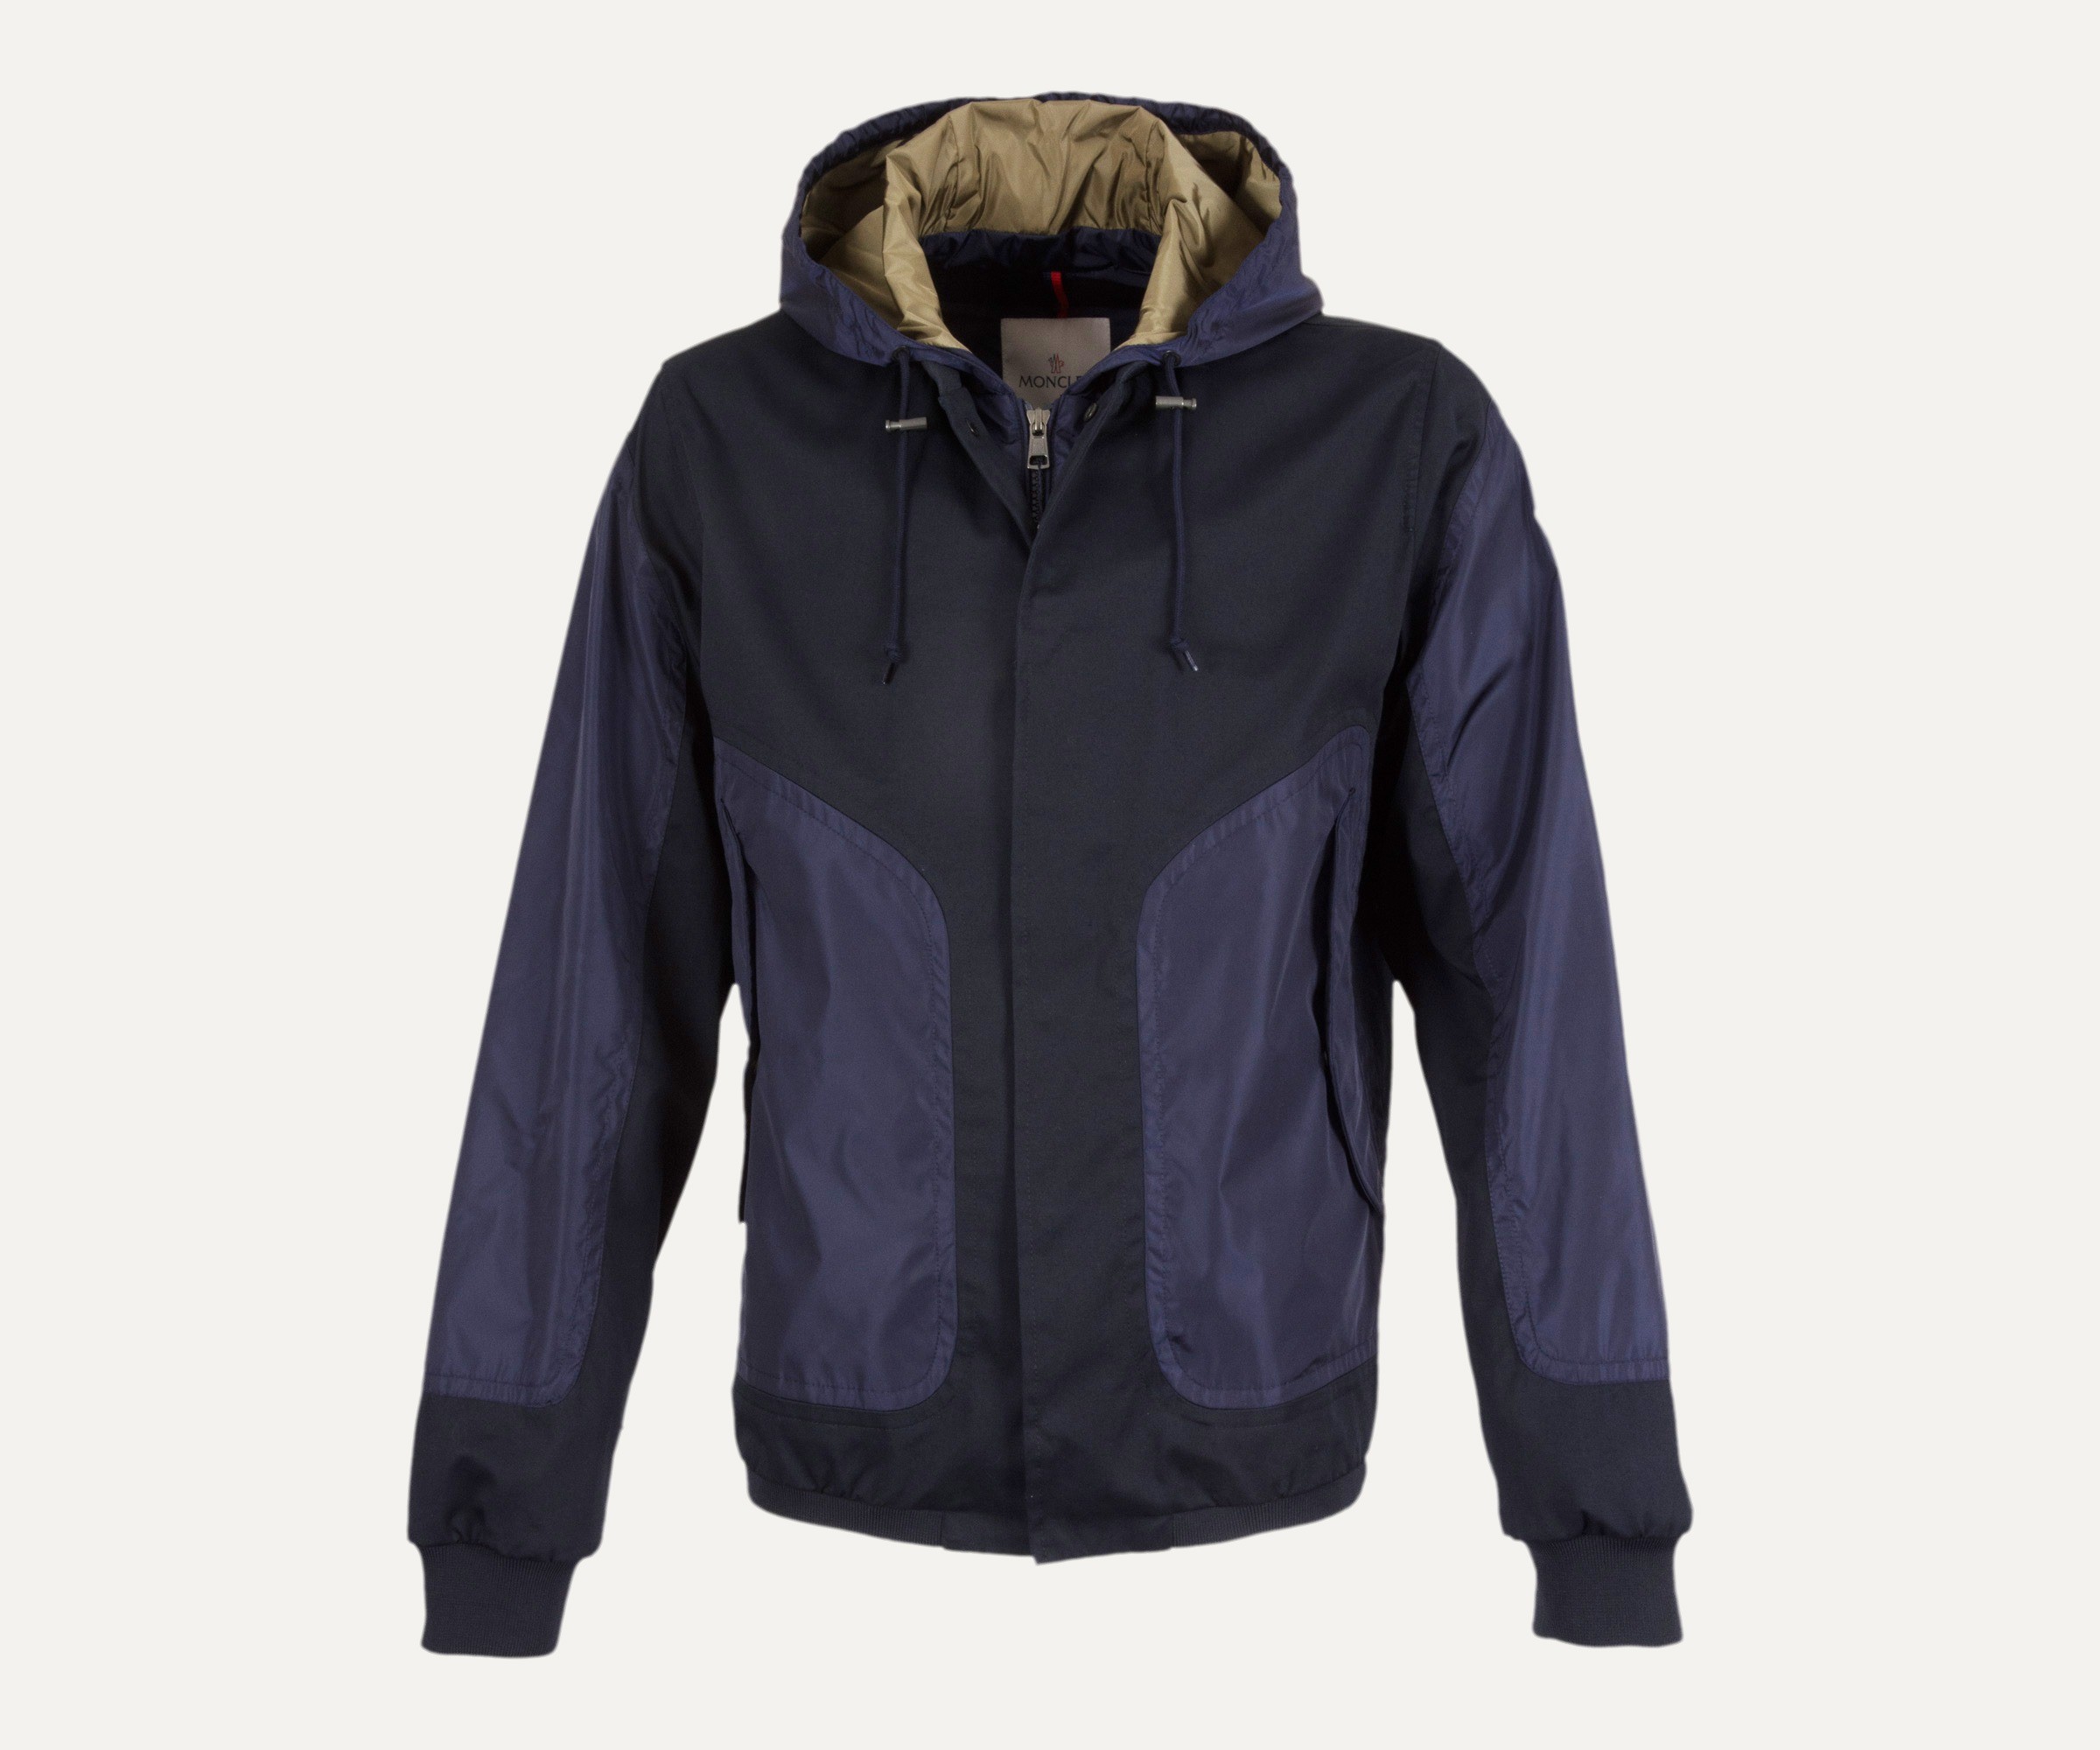 Moncler 'Bryan' Hooded Bomber Jacket with Envelope Pockets Navy and Blue